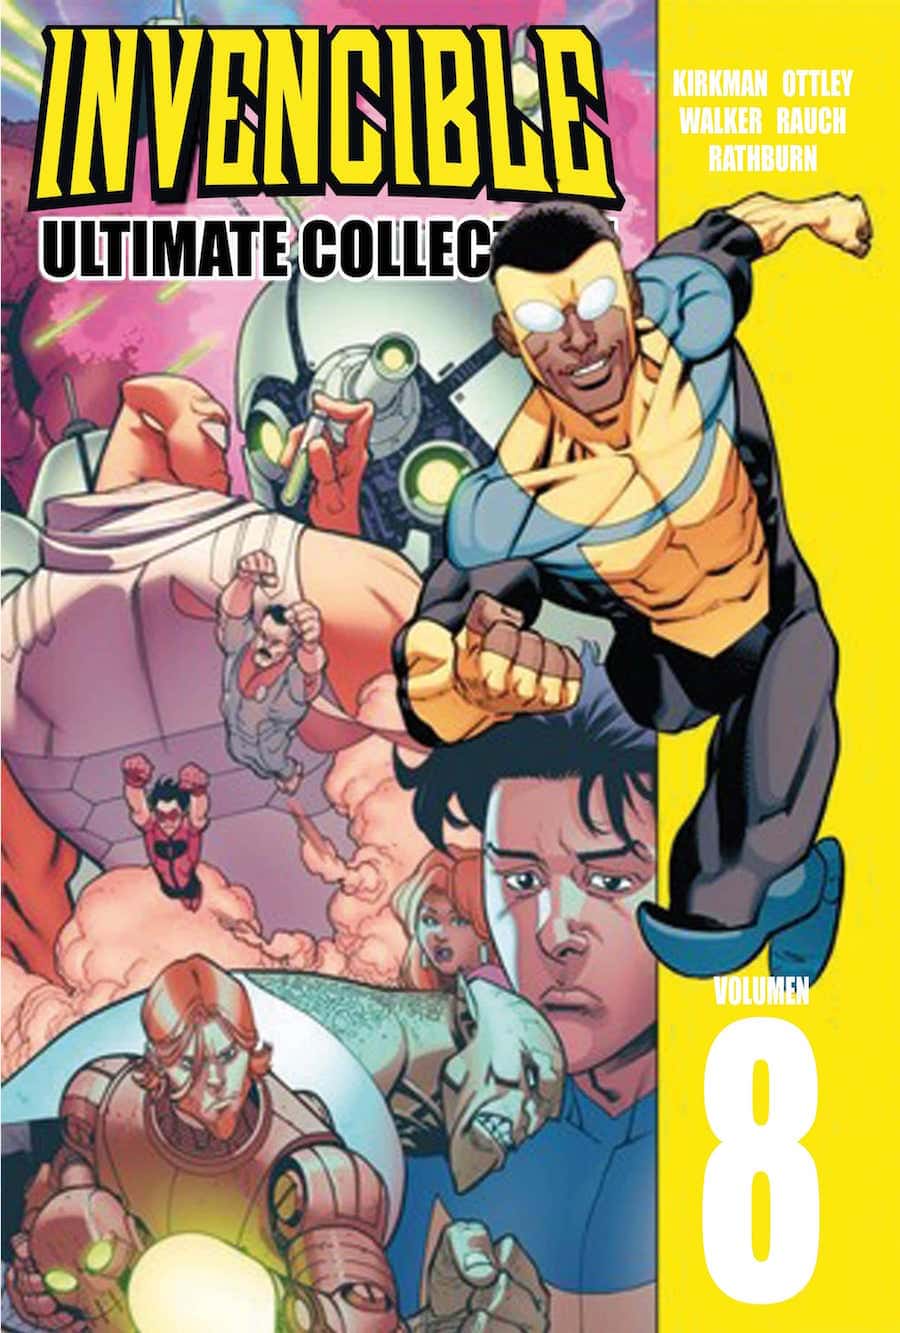 INVENCIBLE. ULTIMATE COLLECTION  VOL. 08